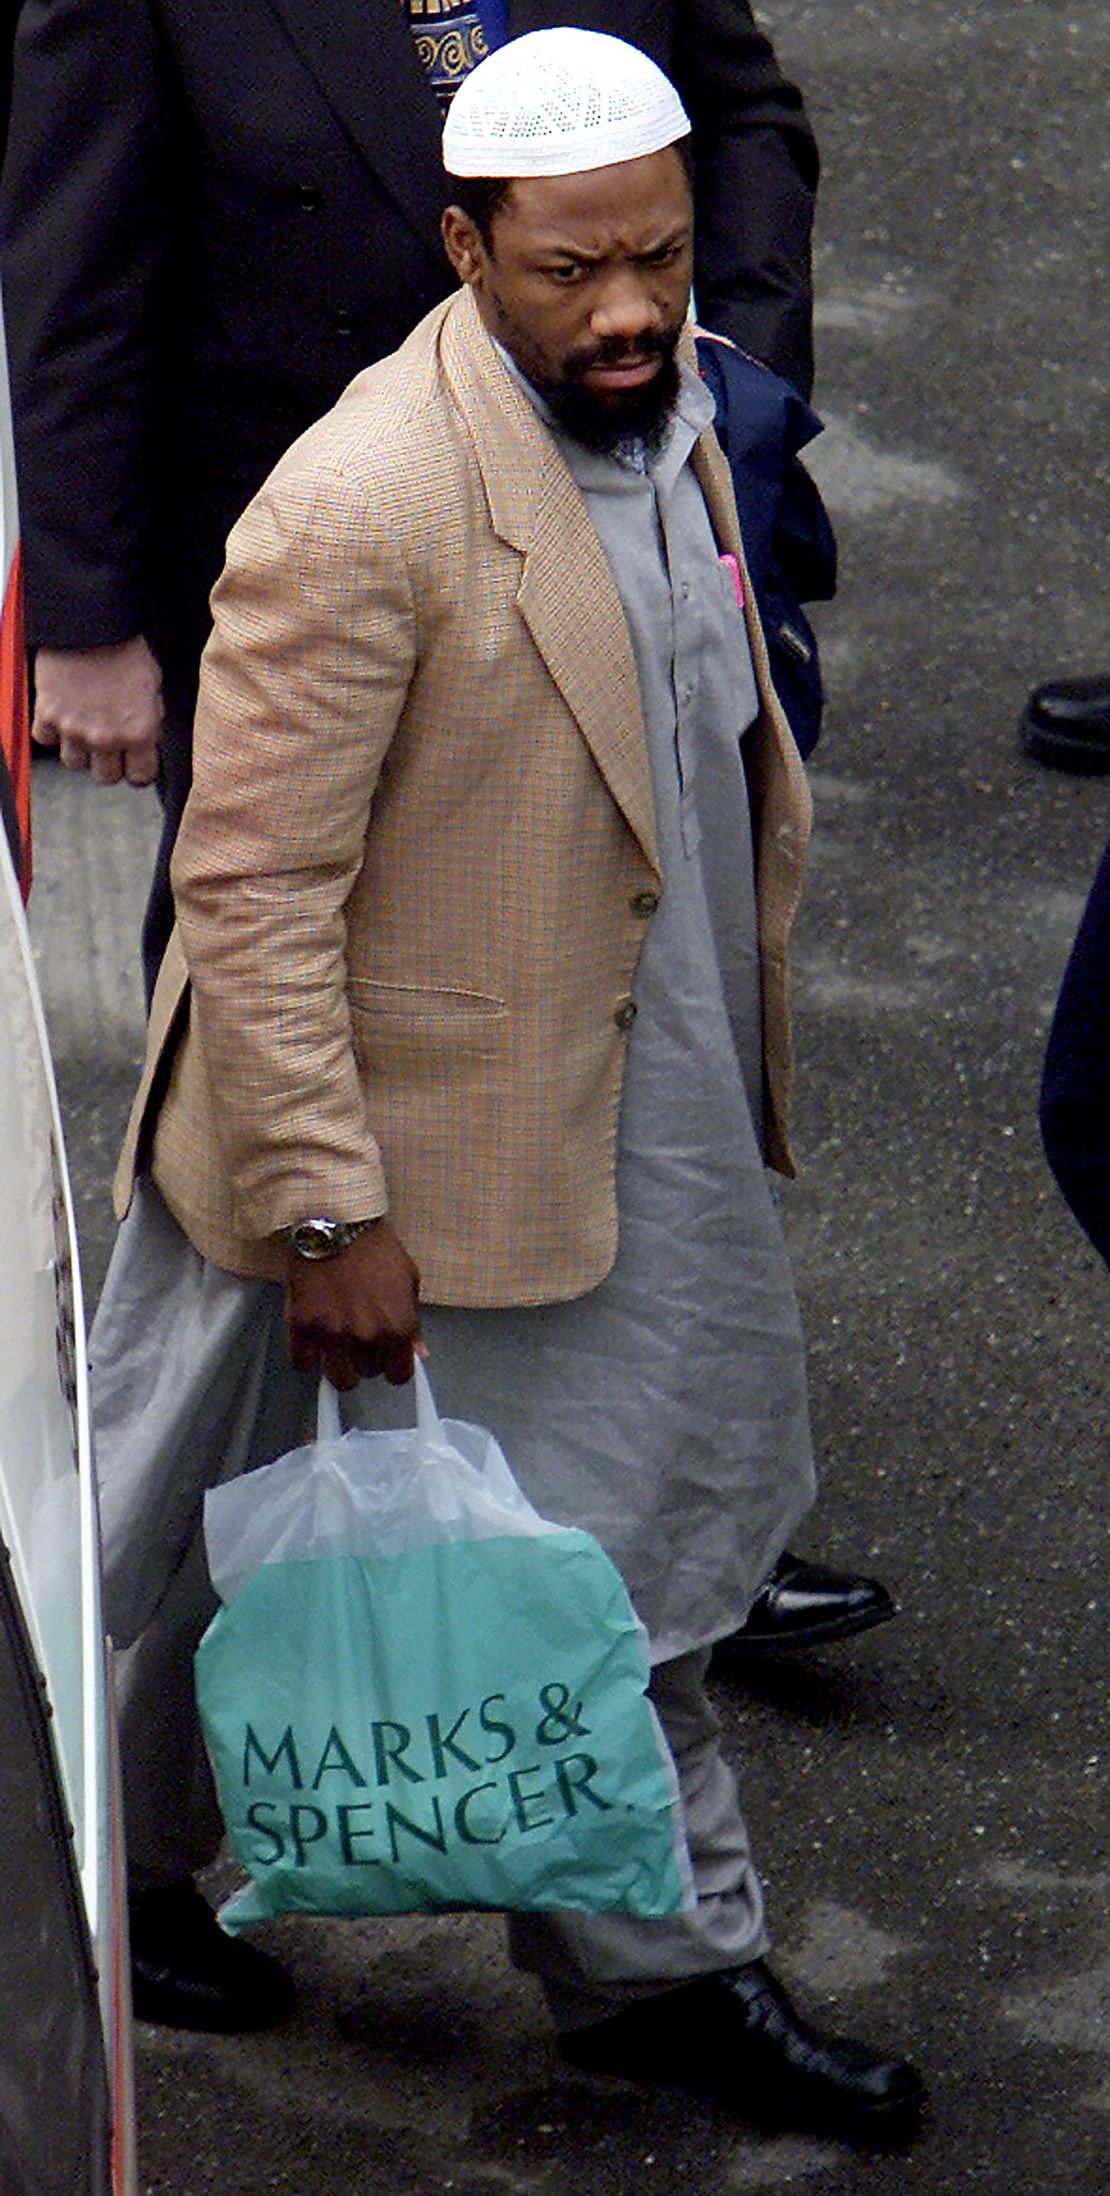 Abdullah el-Faisal arrives at Bow Sreet Magistrates Court in
London in February 2002. 